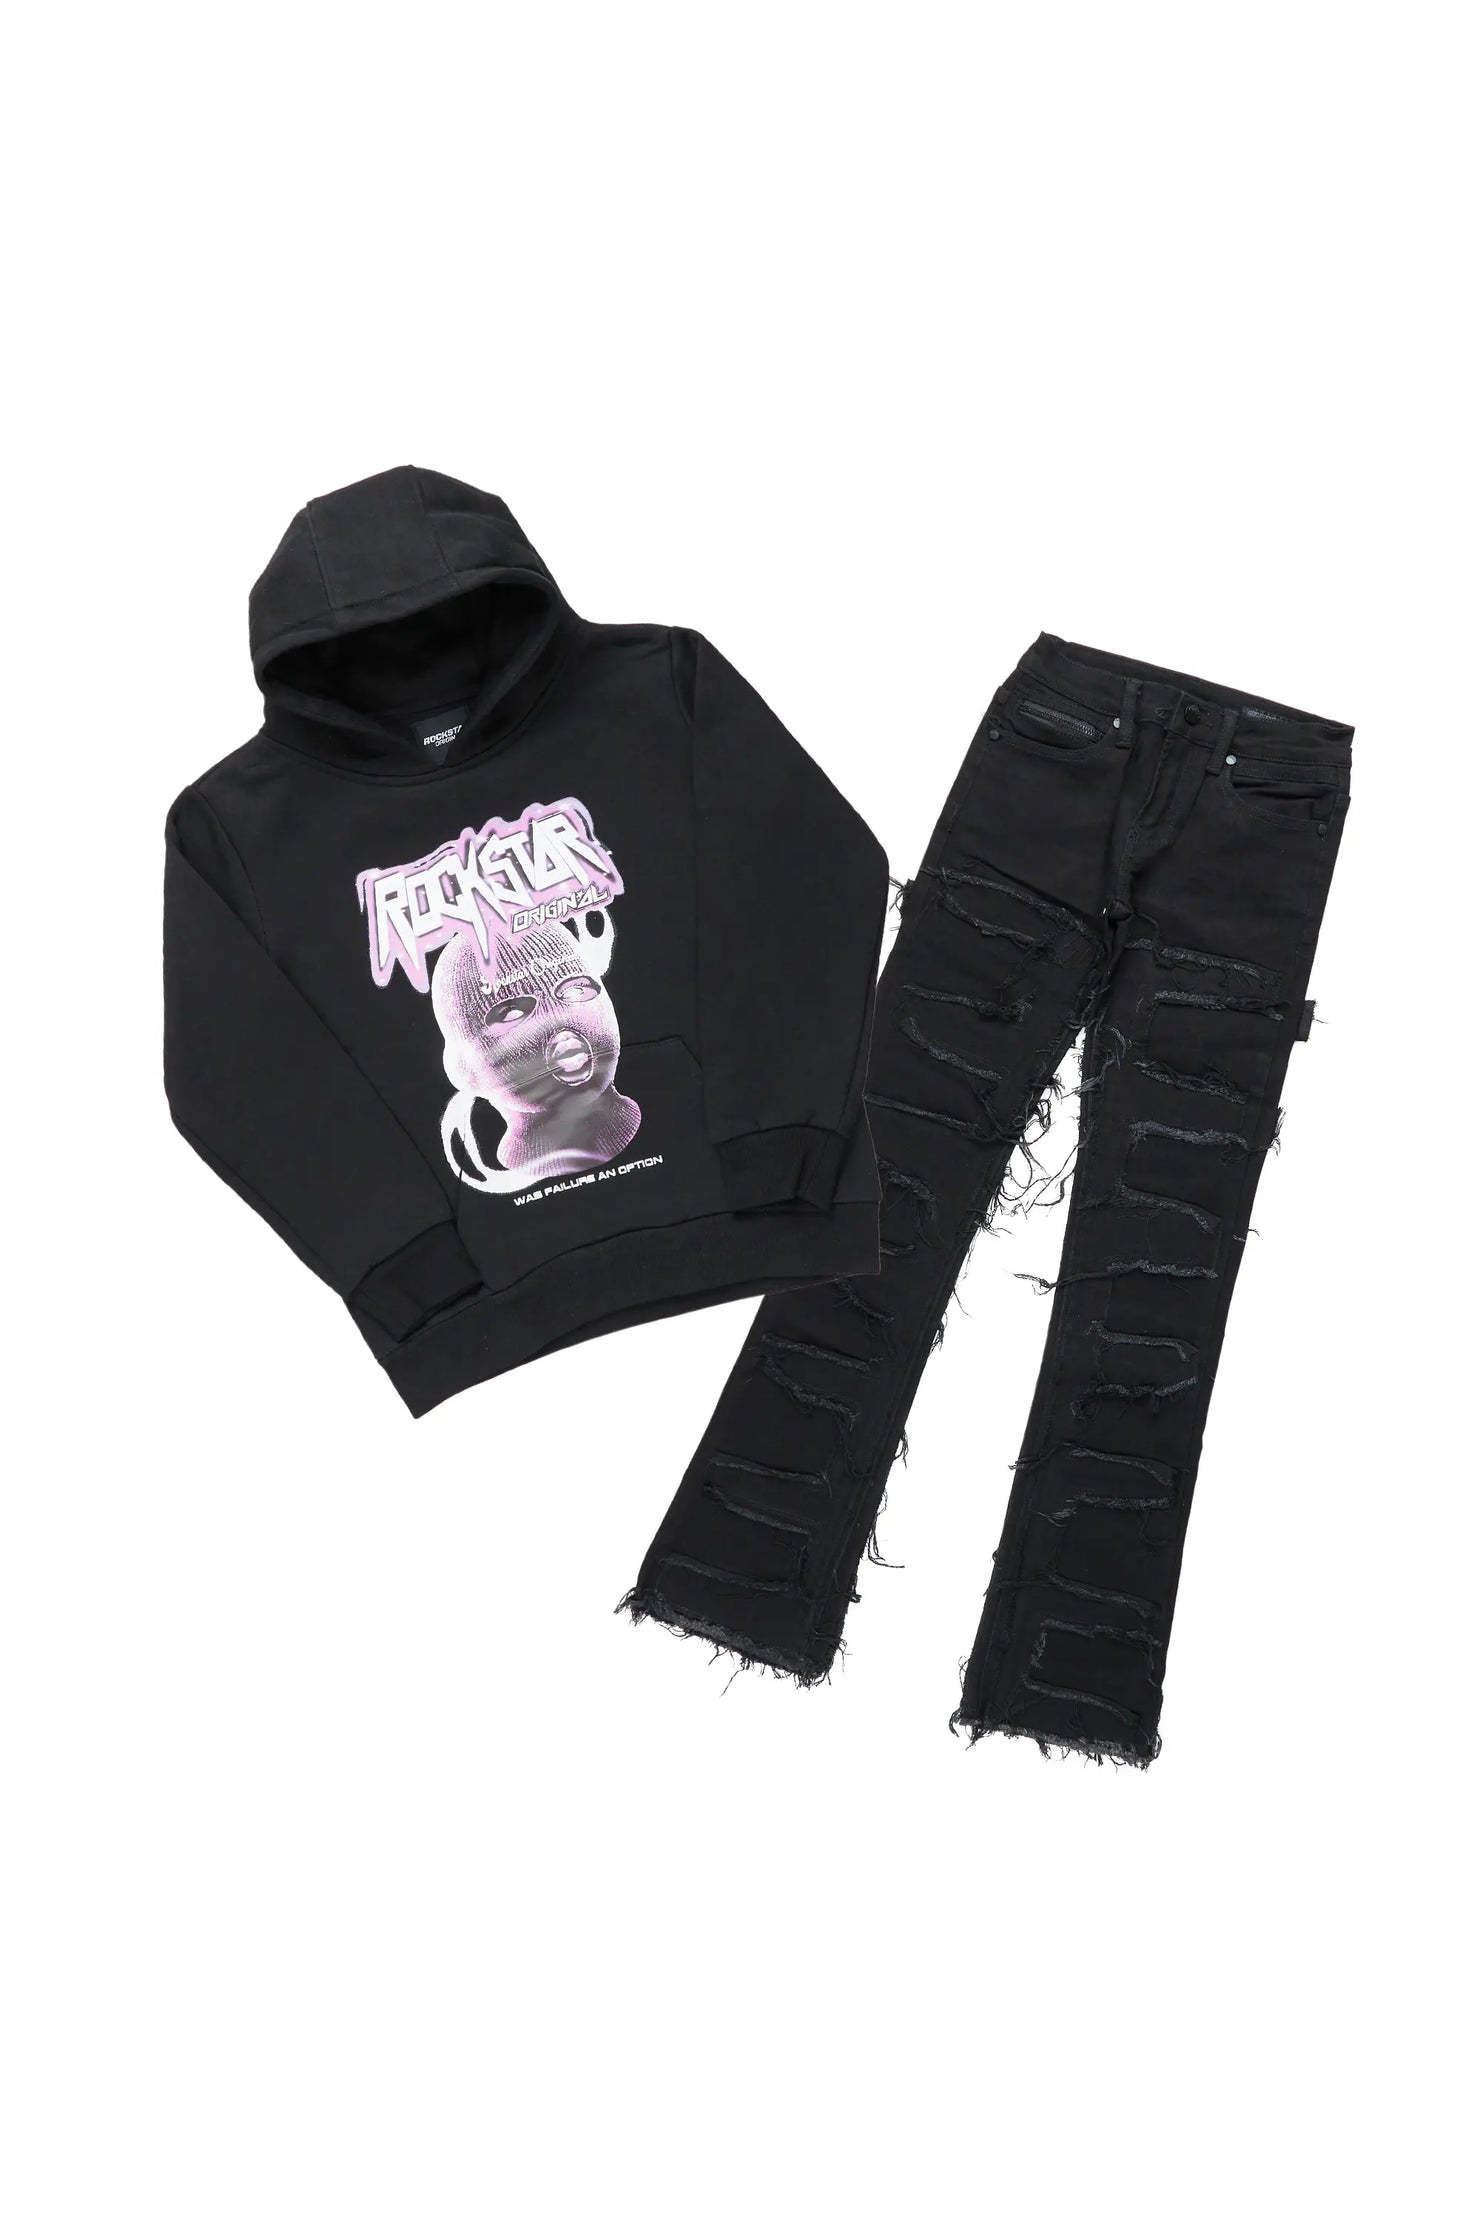 Boys Chaser Black Hoodie/Super Stacked Flare Jean Set